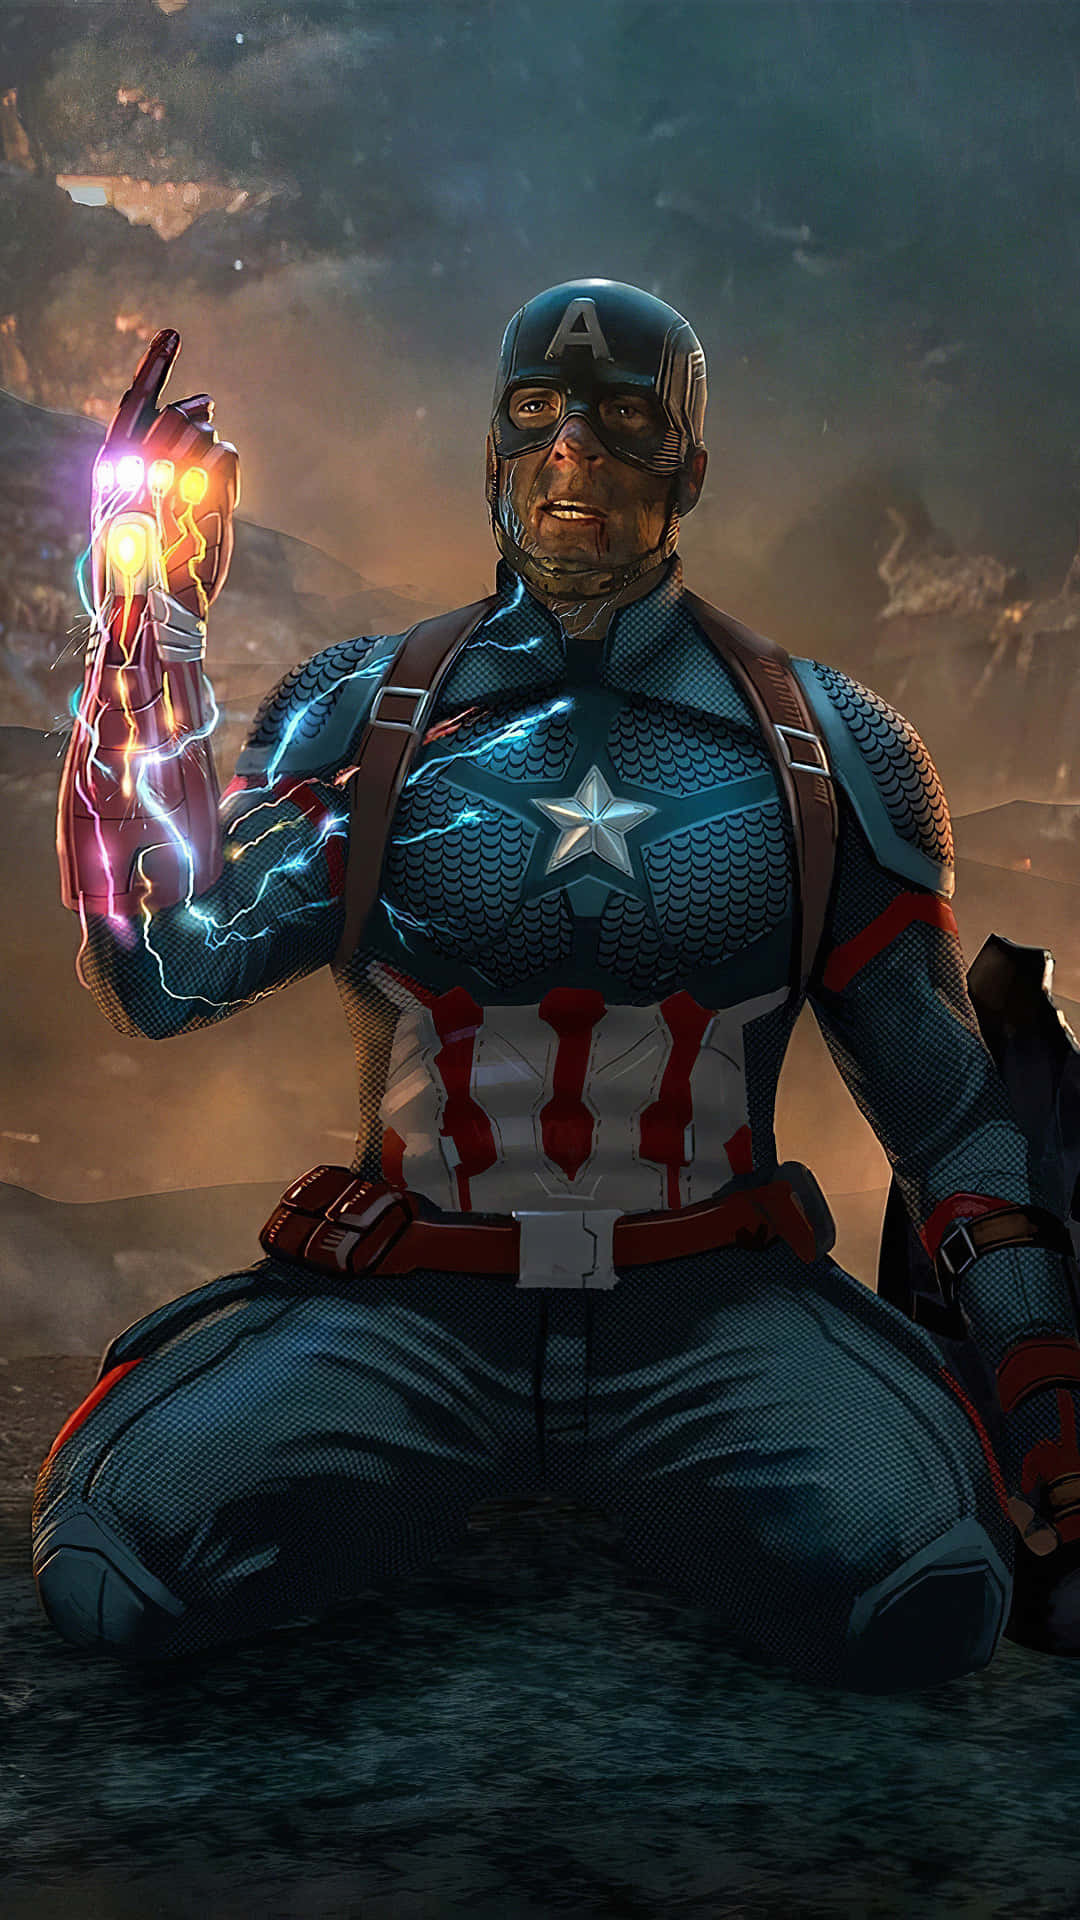 iPhone Wallpapers - Wallpapers for iPhone XS, iPhone XR and iPhone X | Captain  america wallpaper, Marvel captain america, Captain america